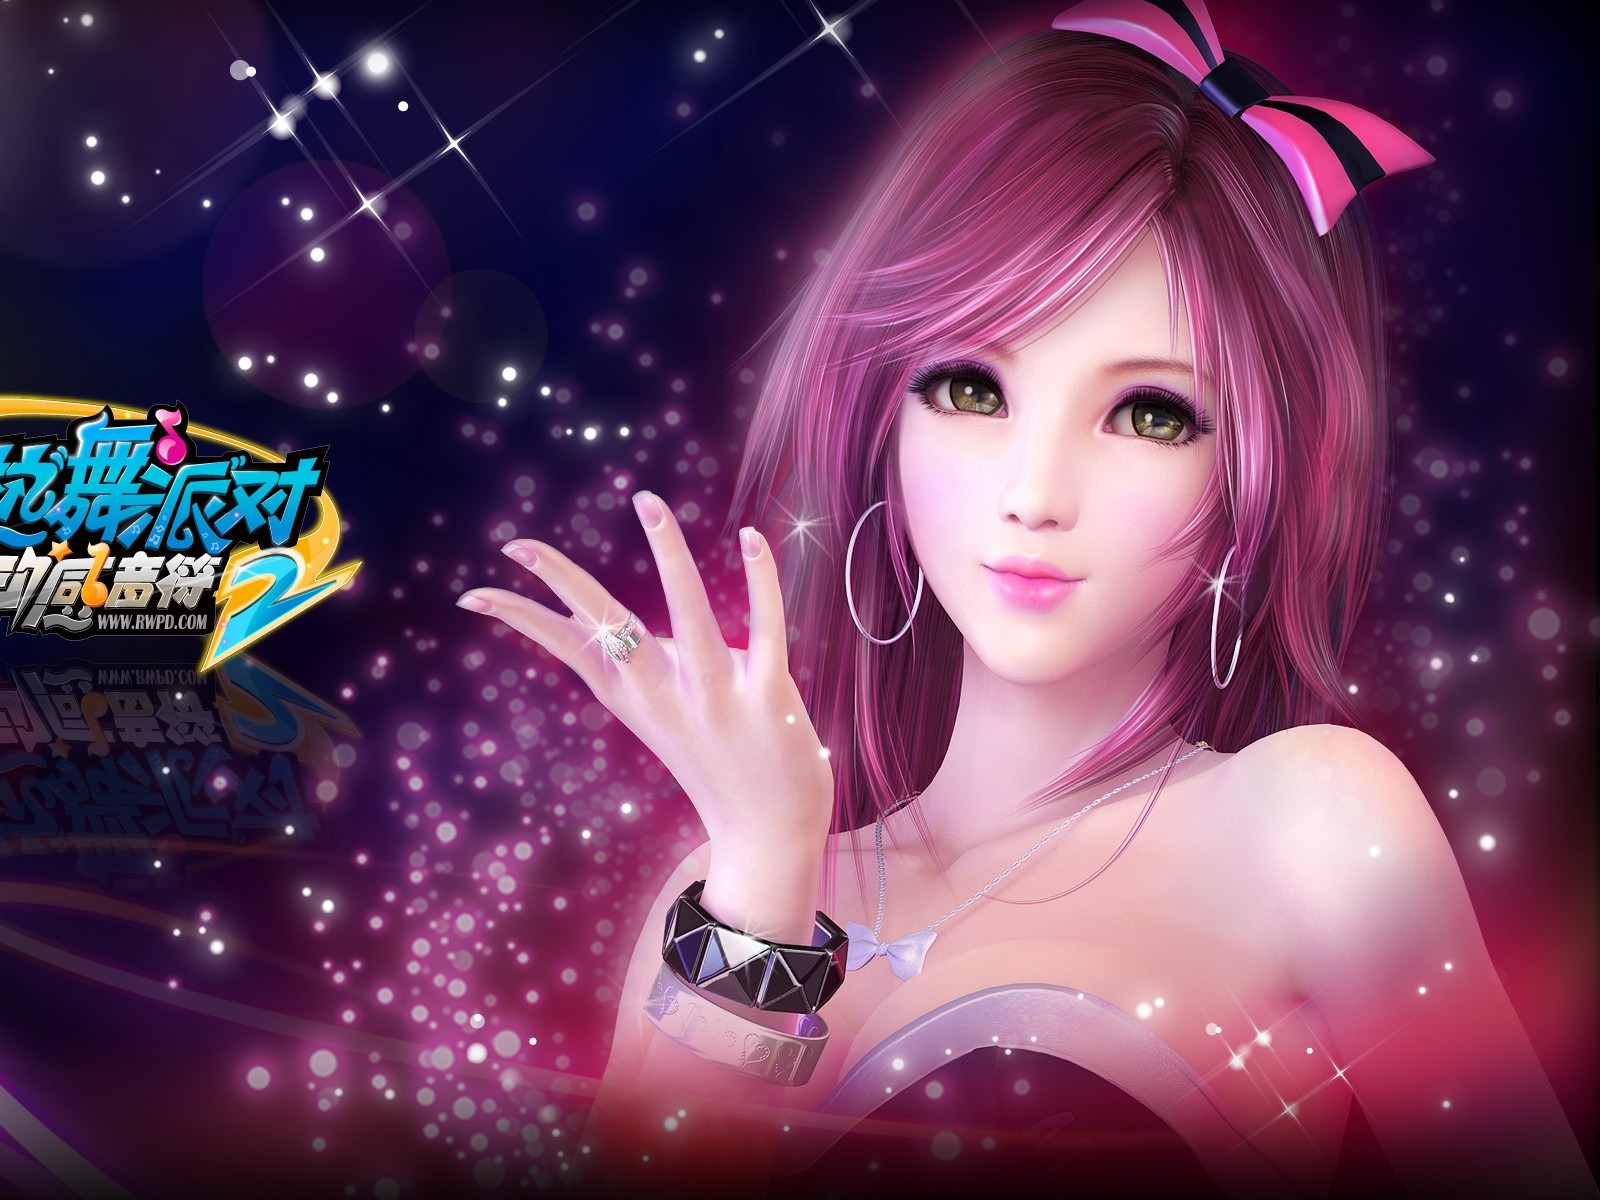 Online game Hot Dance Party II official wallpapers #26 - 1600x1200